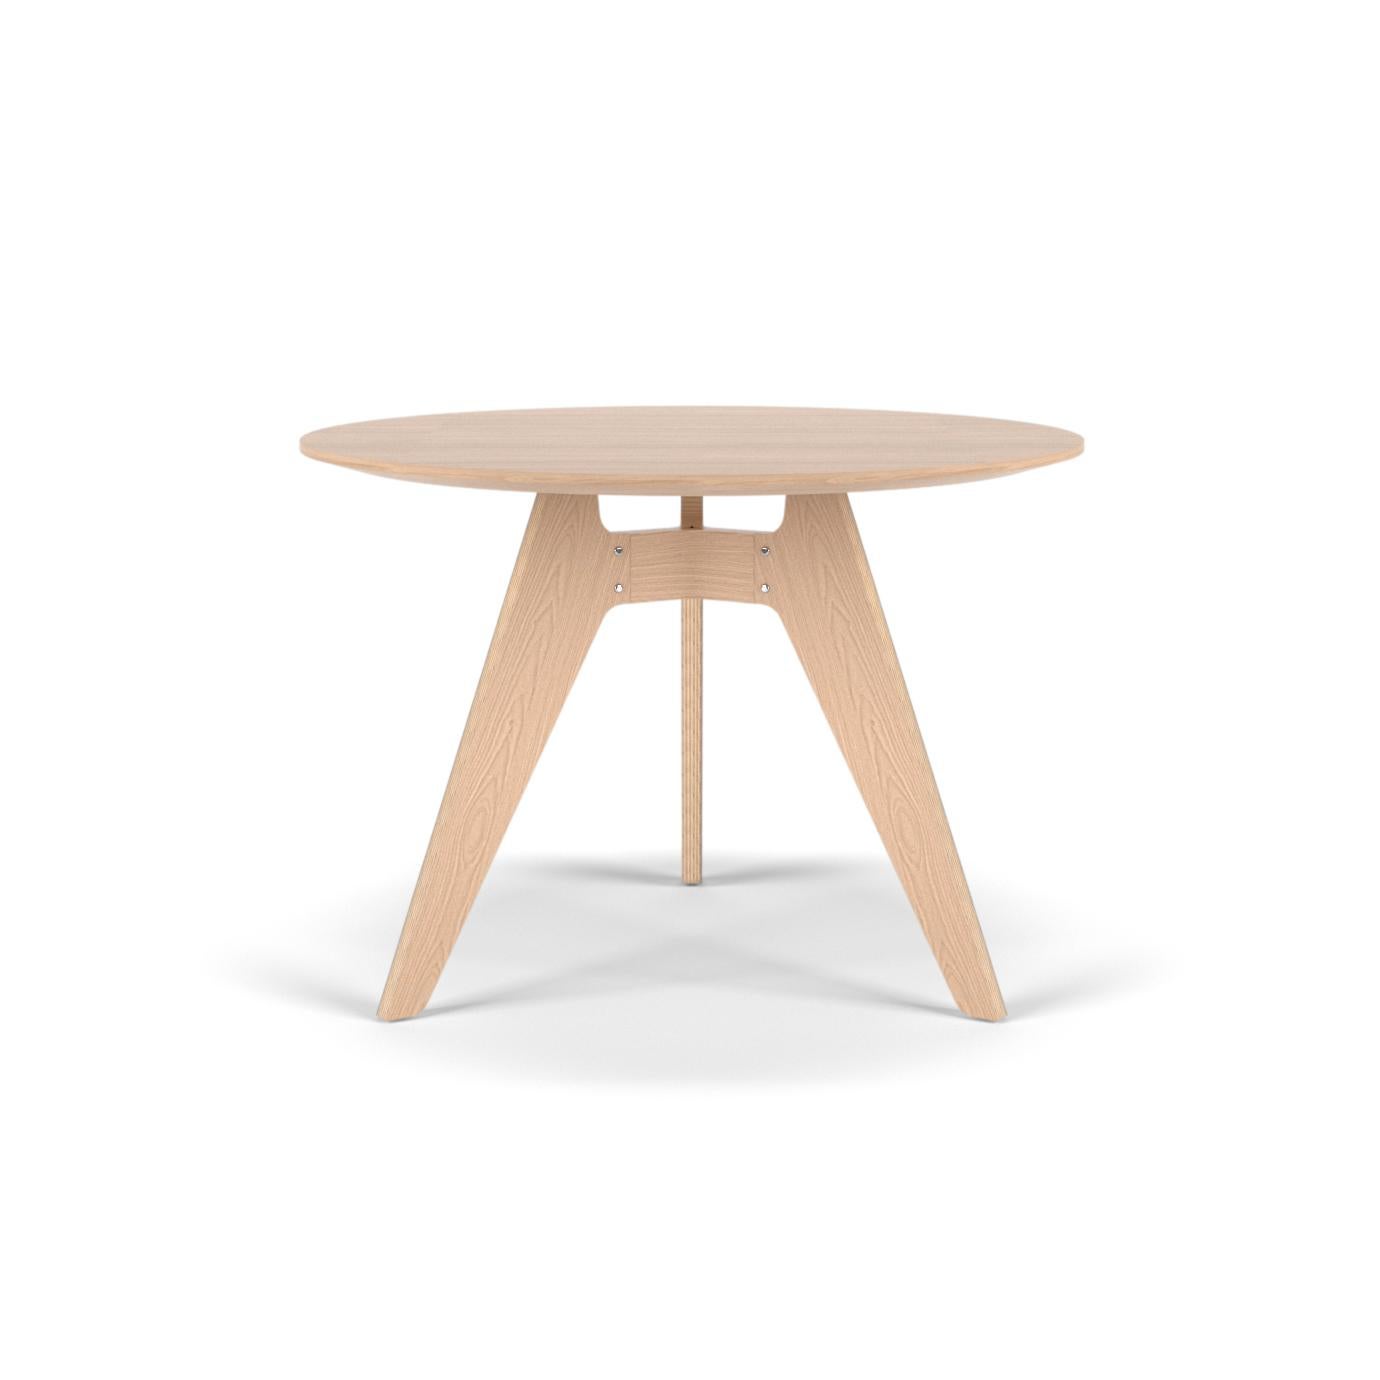 Contemporary Modern Round Table 'Lavitta' by Poiat, Natural Oak, 100cm For Sale